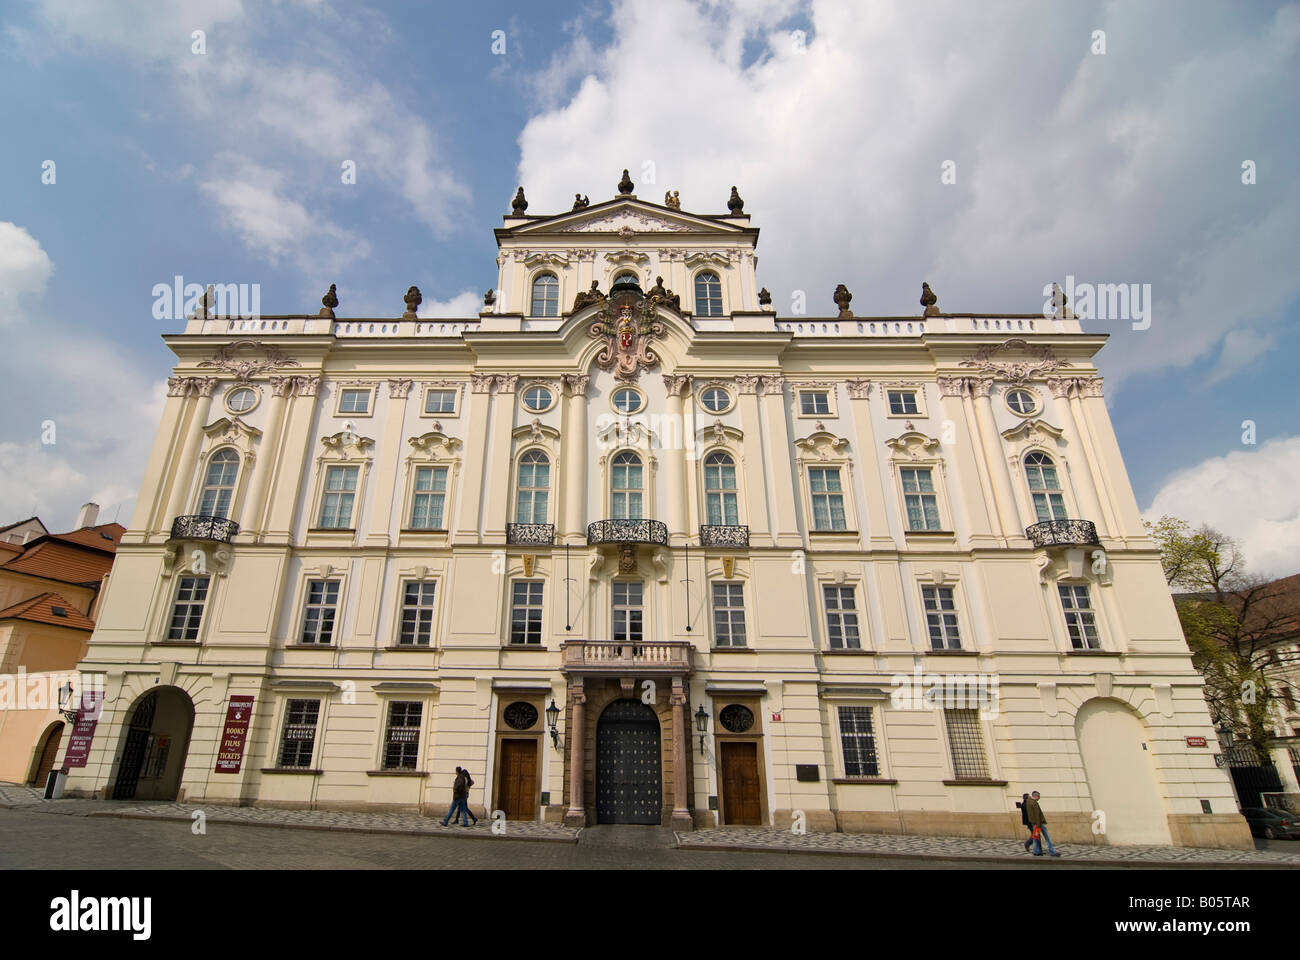 Horizontal wide angle of the front rococo facade of the Archibishop's Palace 'Arcibiskupsky palac' in Hradcany on a sunny day. Stock Photo